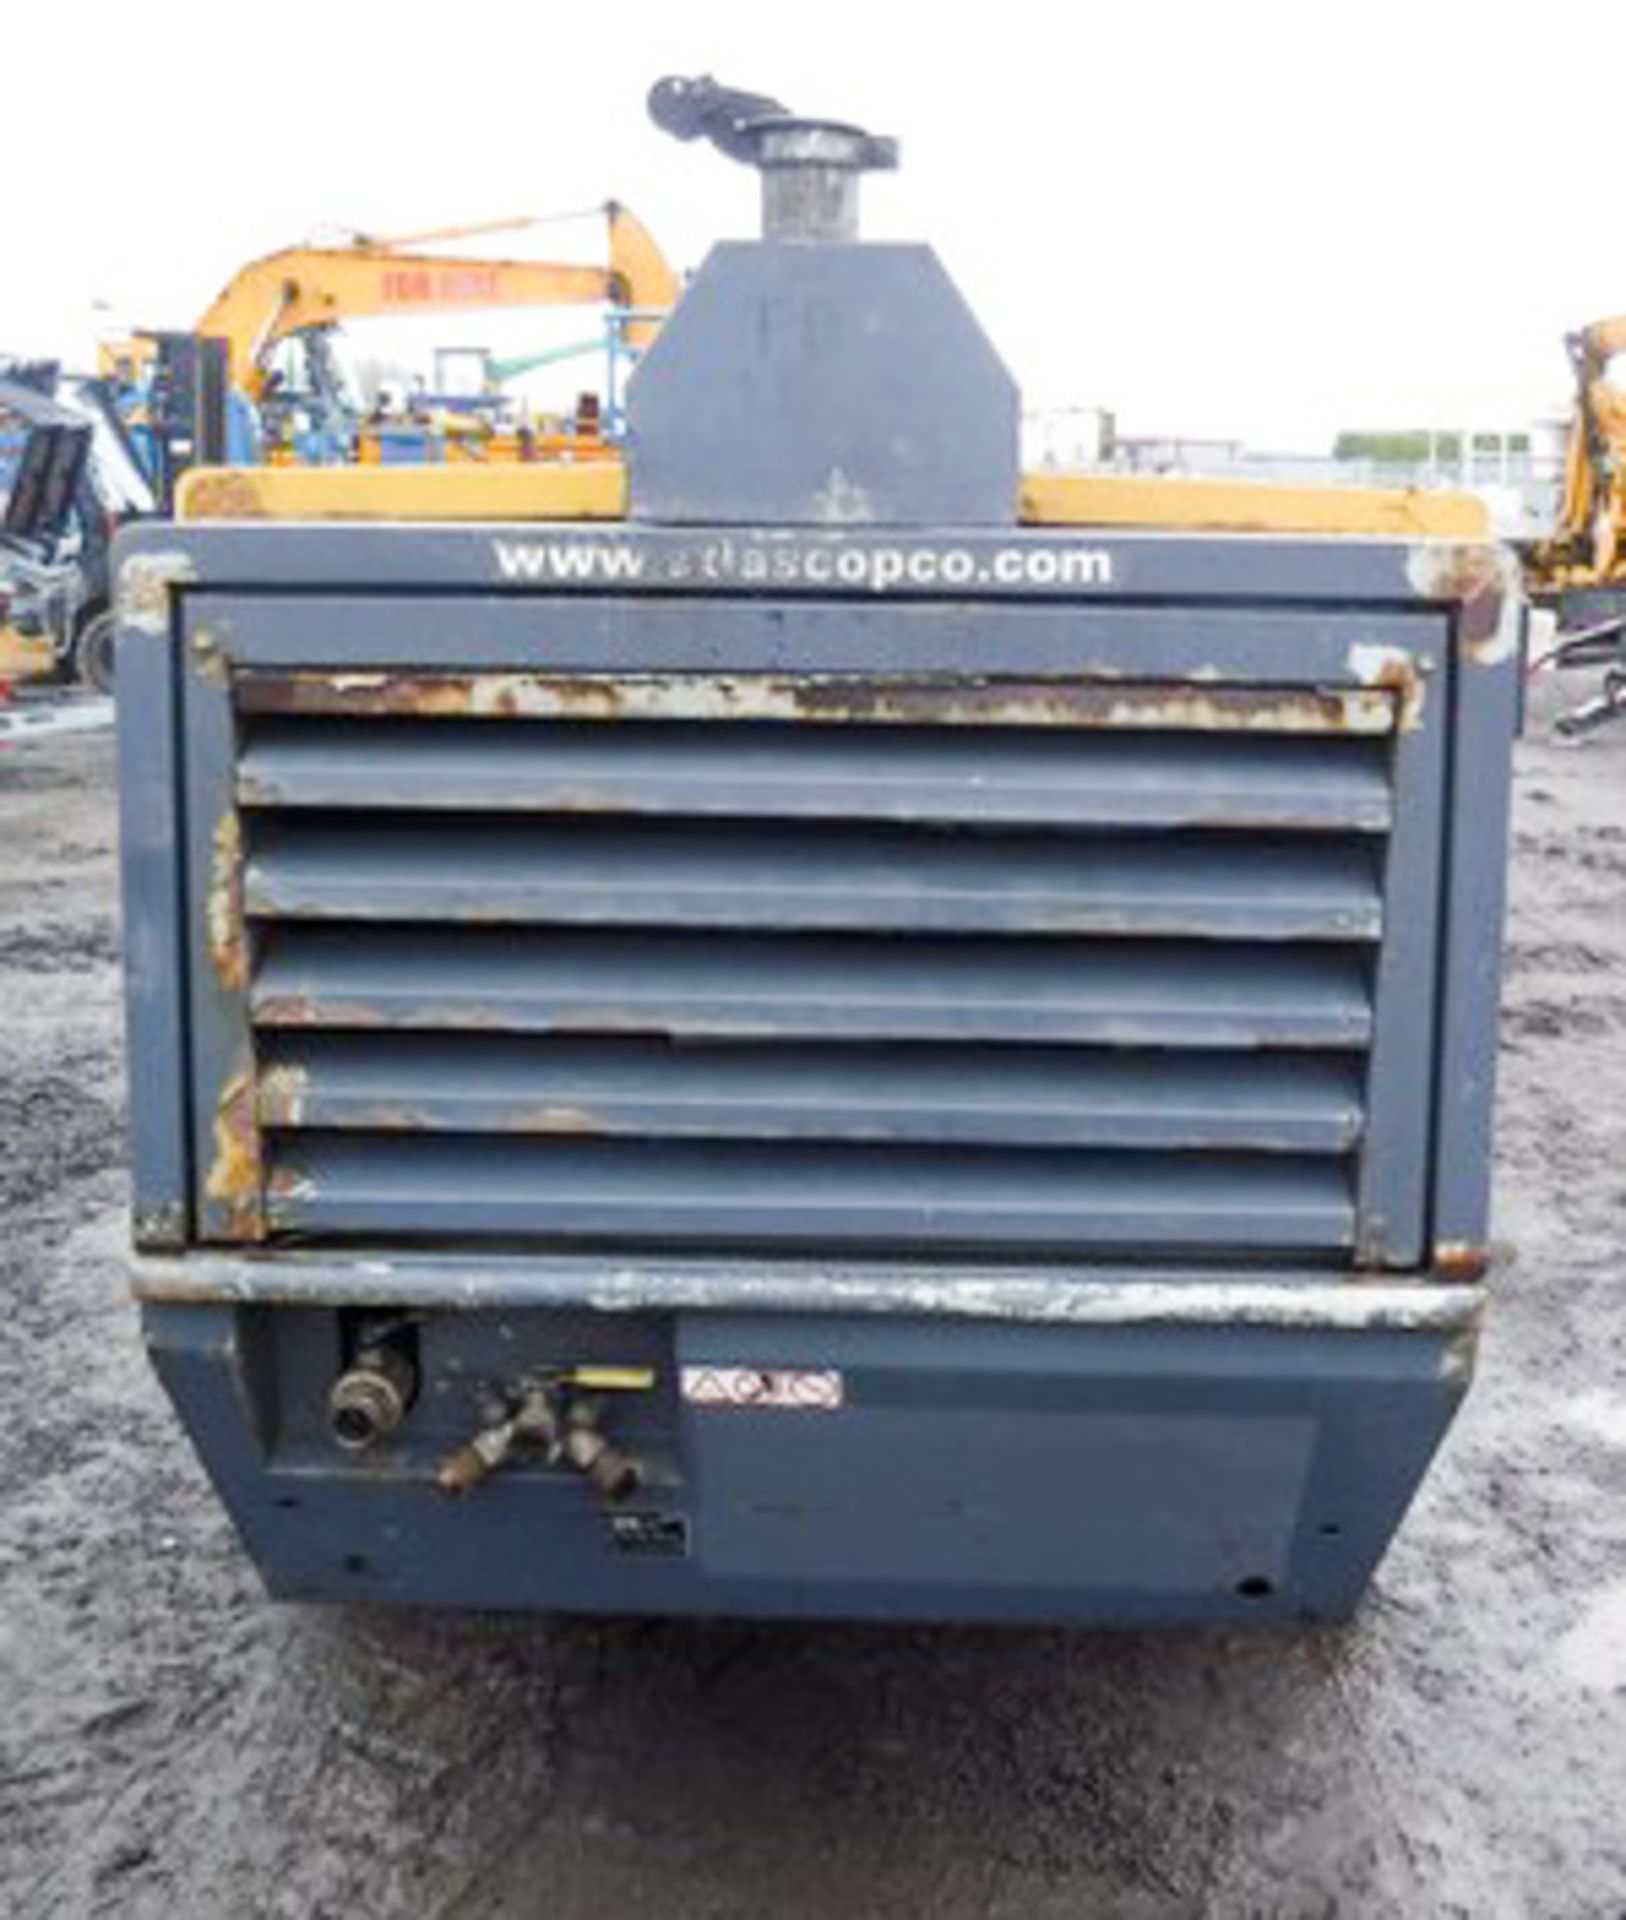 2009 ATLAS COPCO COMPRESSOR, XAS186/400CEM, S/N 768651, 3582HRS (NOT VERIFIED) - Image 10 of 12